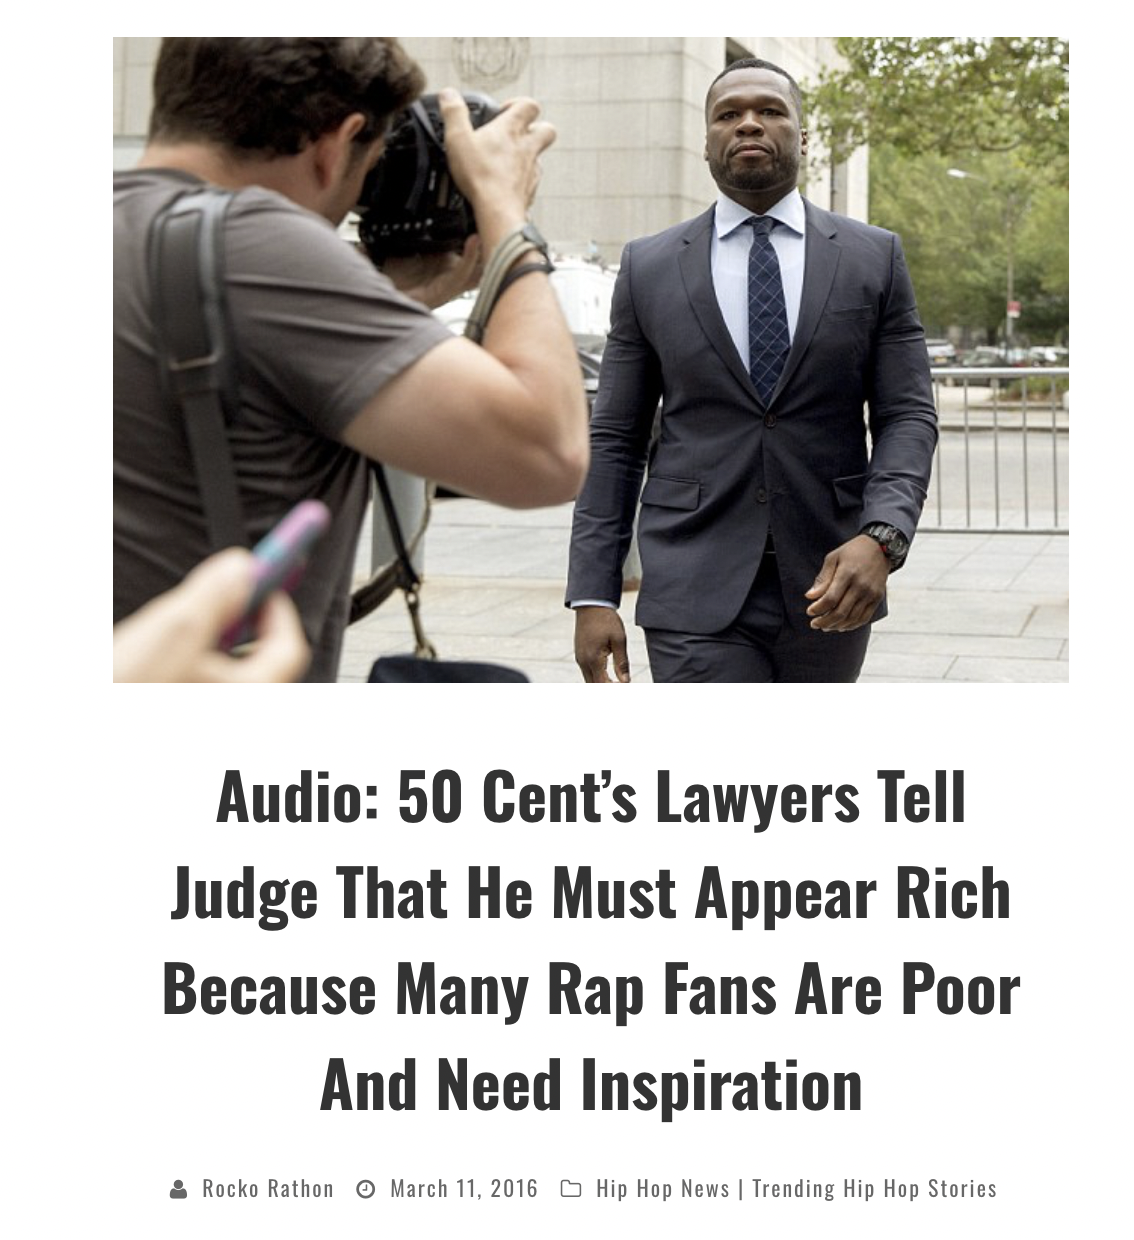 50 cent g shock 7900 - Audio 50 Cent's Lawyers Tell Judge That He Must Appear Rich Because Many Rap Fans Are Poor And Need Inspiration Rocke Rathon Hip Hop News | Trending Hip Hop Stories